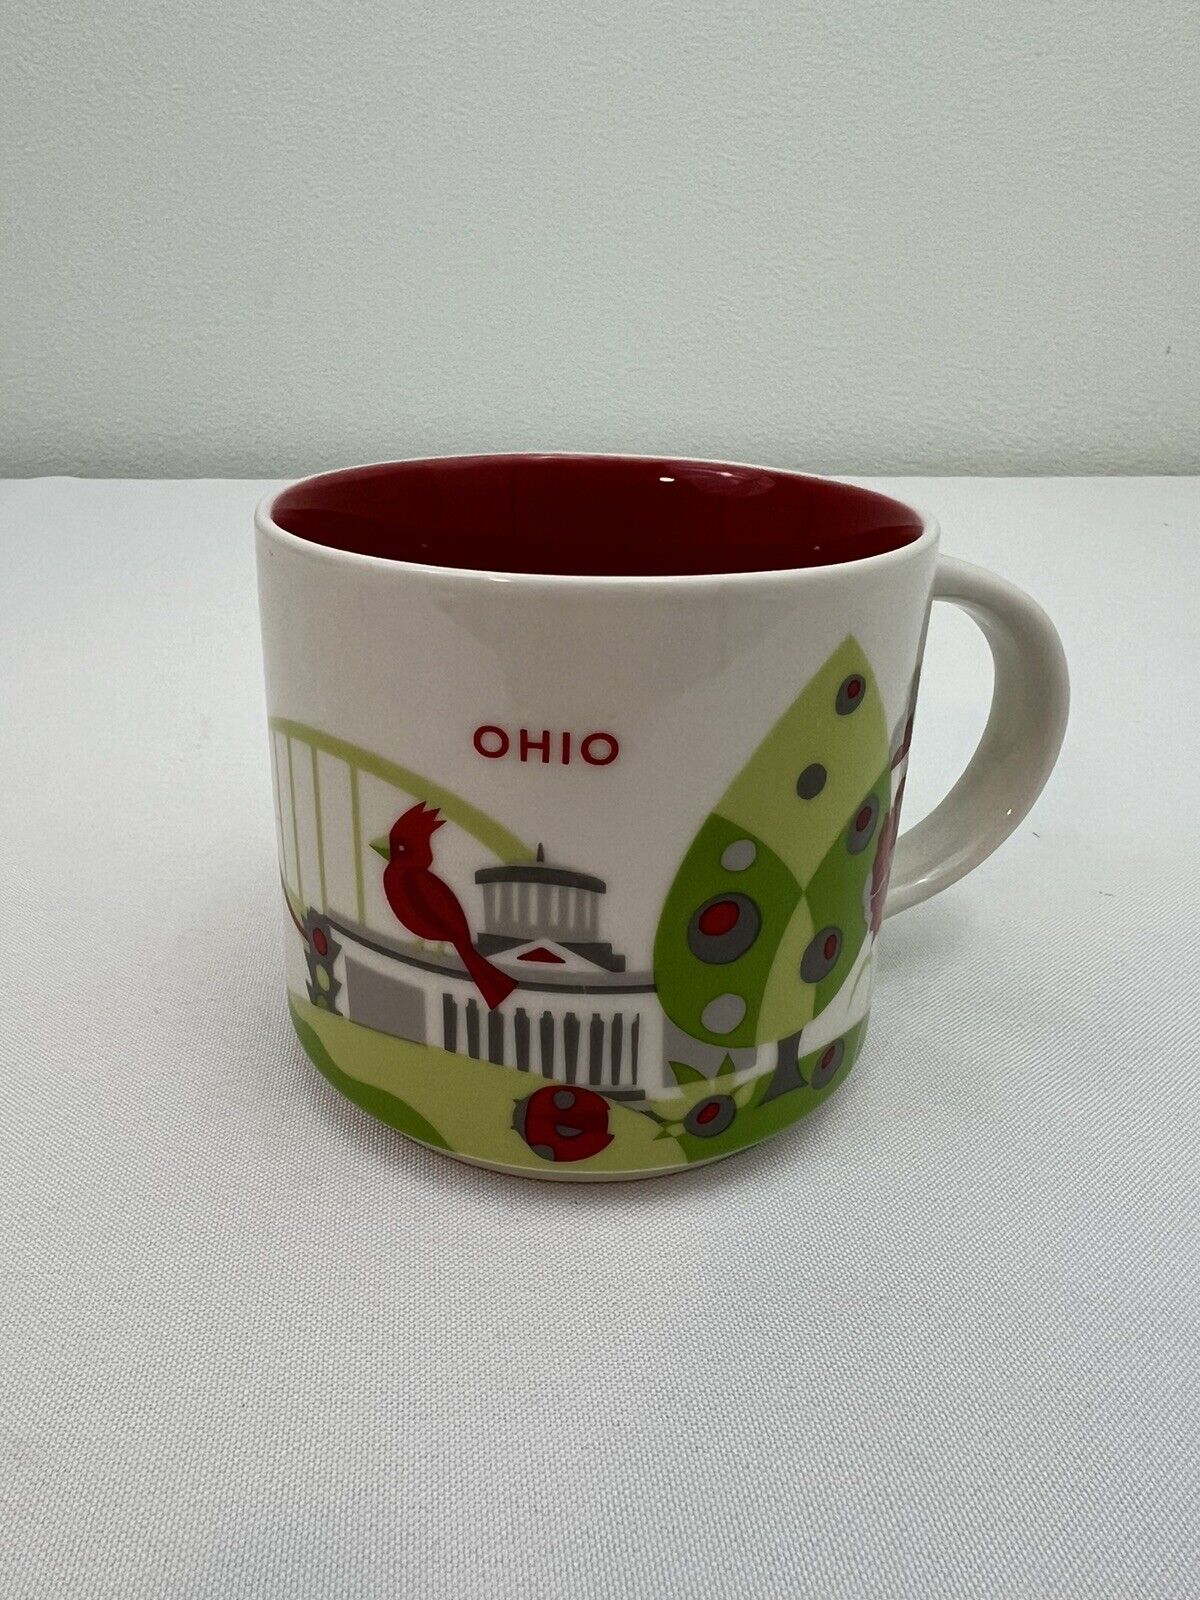 Starbucks Ohio You Are Here Collection 2013 14 oz Coffee Cup Mug Red, Green